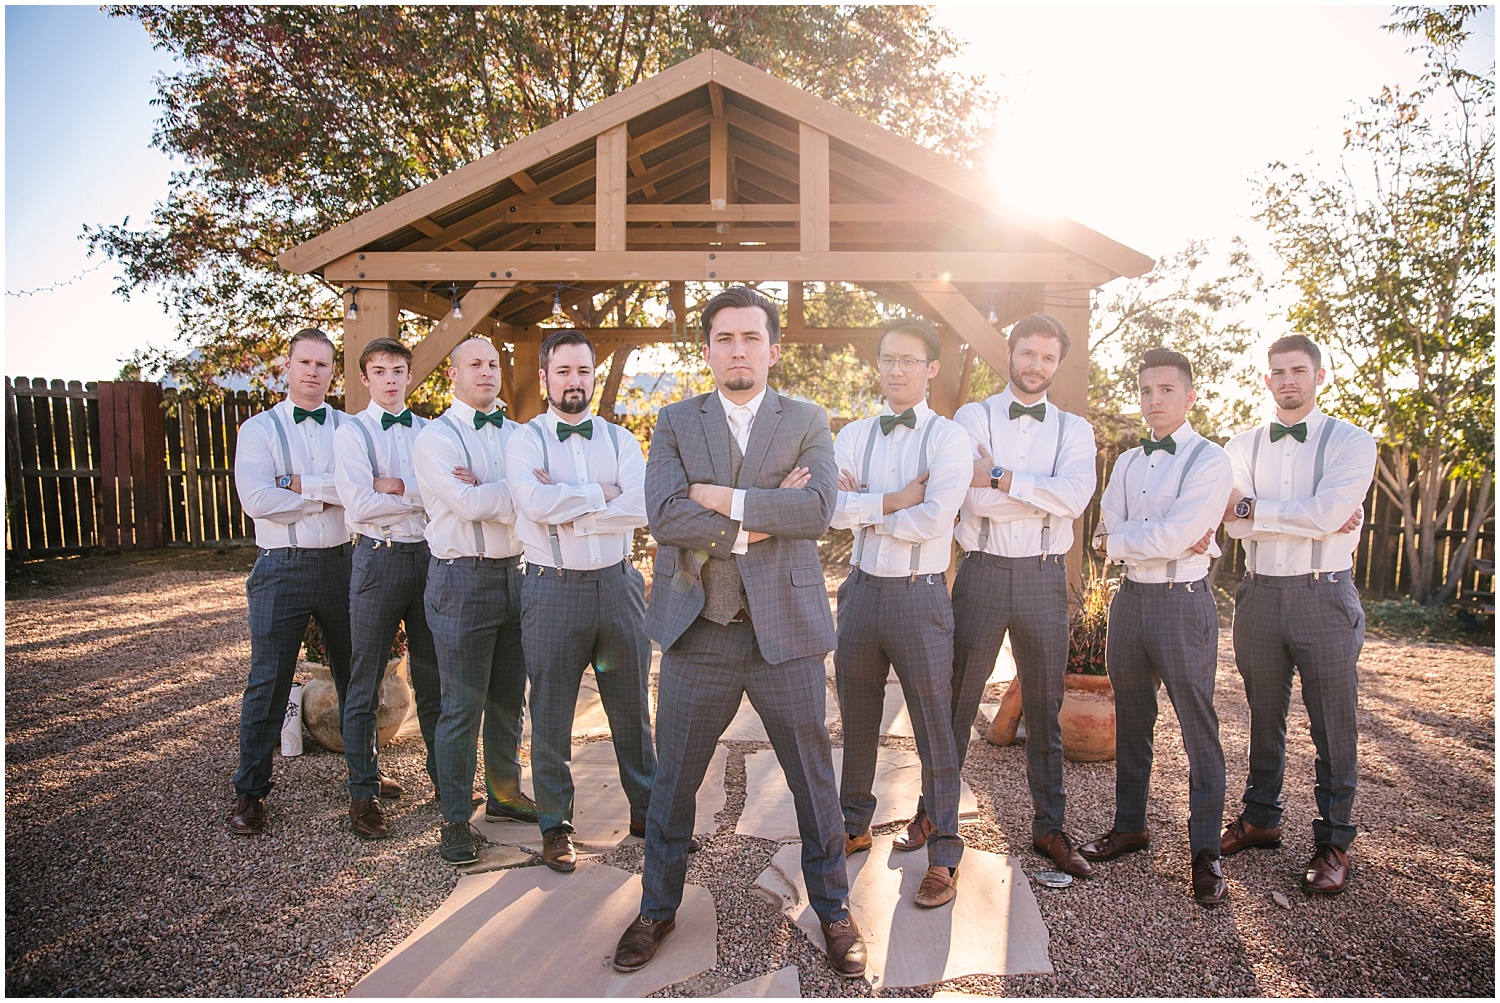 Groom and groomsmen in custom gray suit and suspenders by Ann Matthews in Albuquerque New Mexico